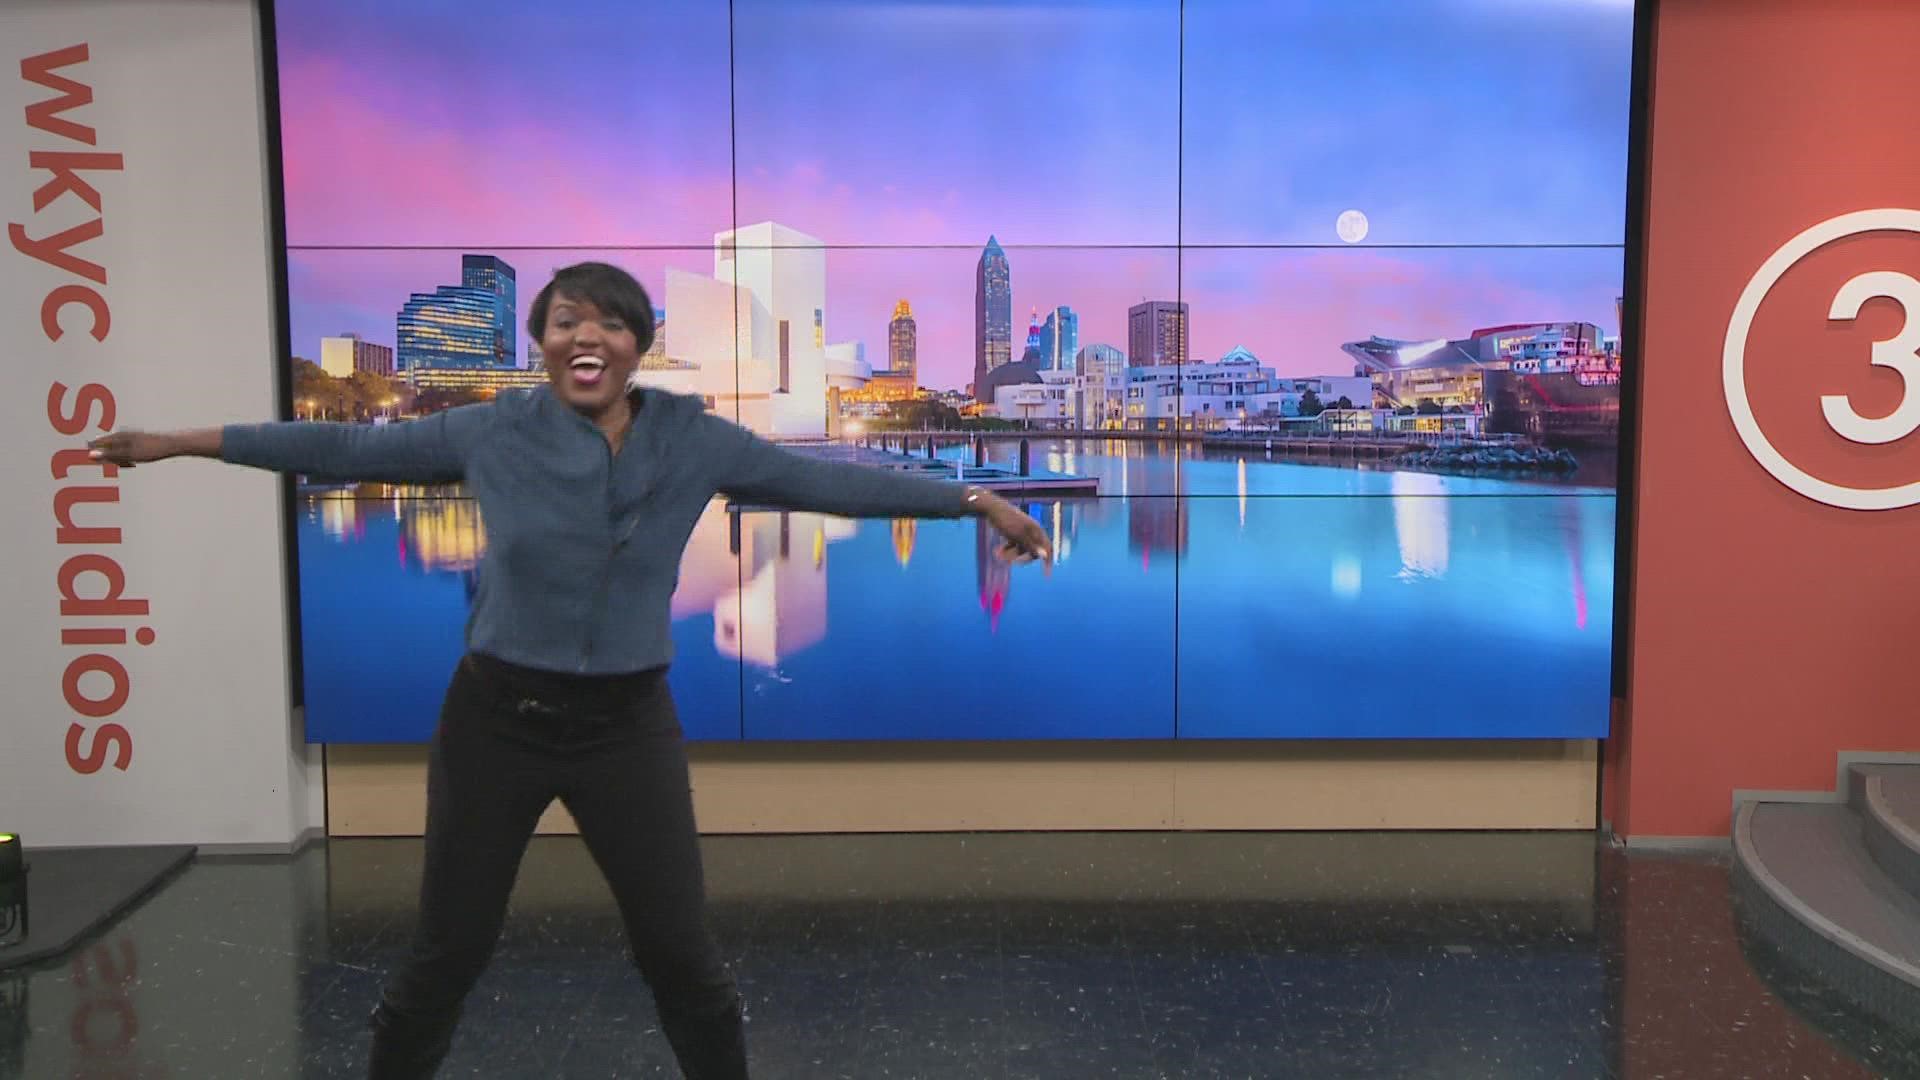 This is awesome! Check out these dance moves!